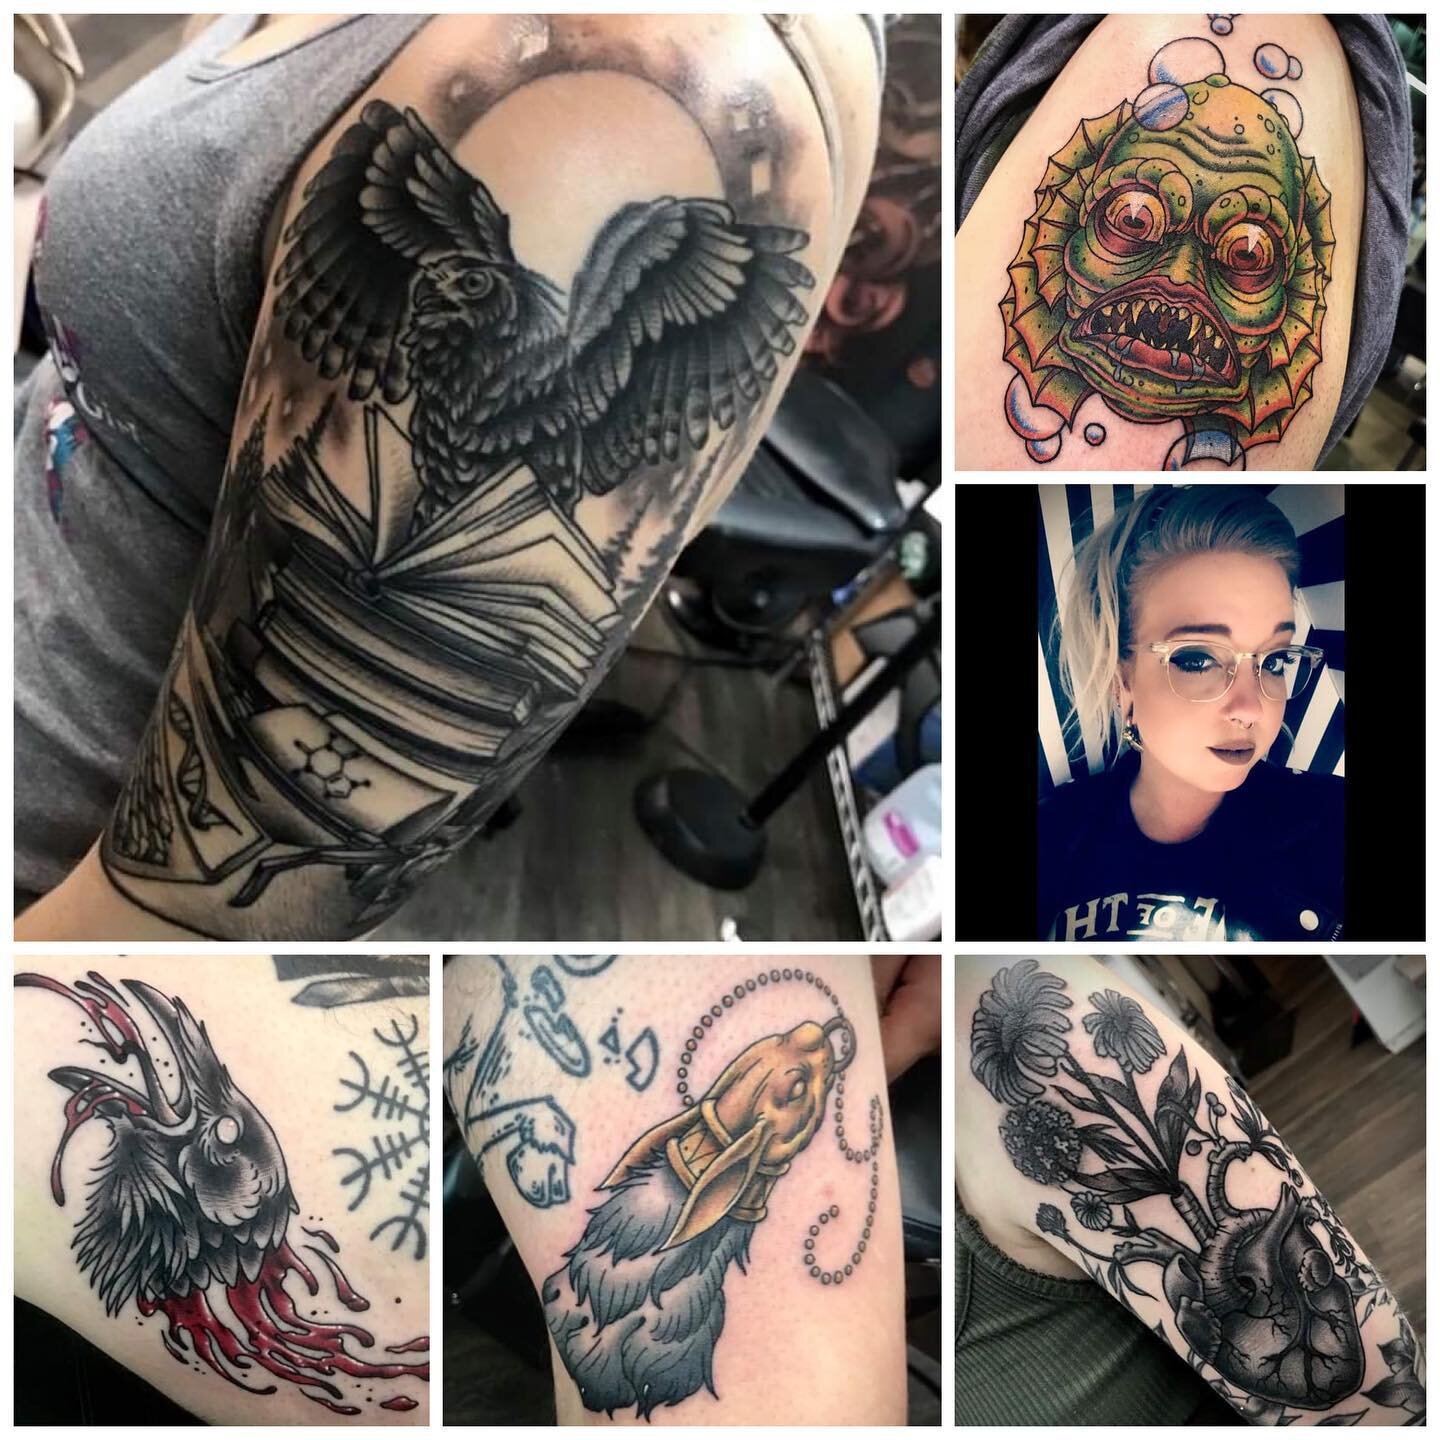 Guys and gals! 
Meet our pal Jess! 
She hails from The Sunshine State; and has never seen the leaves change. To remedy that she&rsquo;s is coming to visit us for a guest spot OCT 12-16🍂⚡️

Message us to snag a spot with her! 
To see more of her amaz